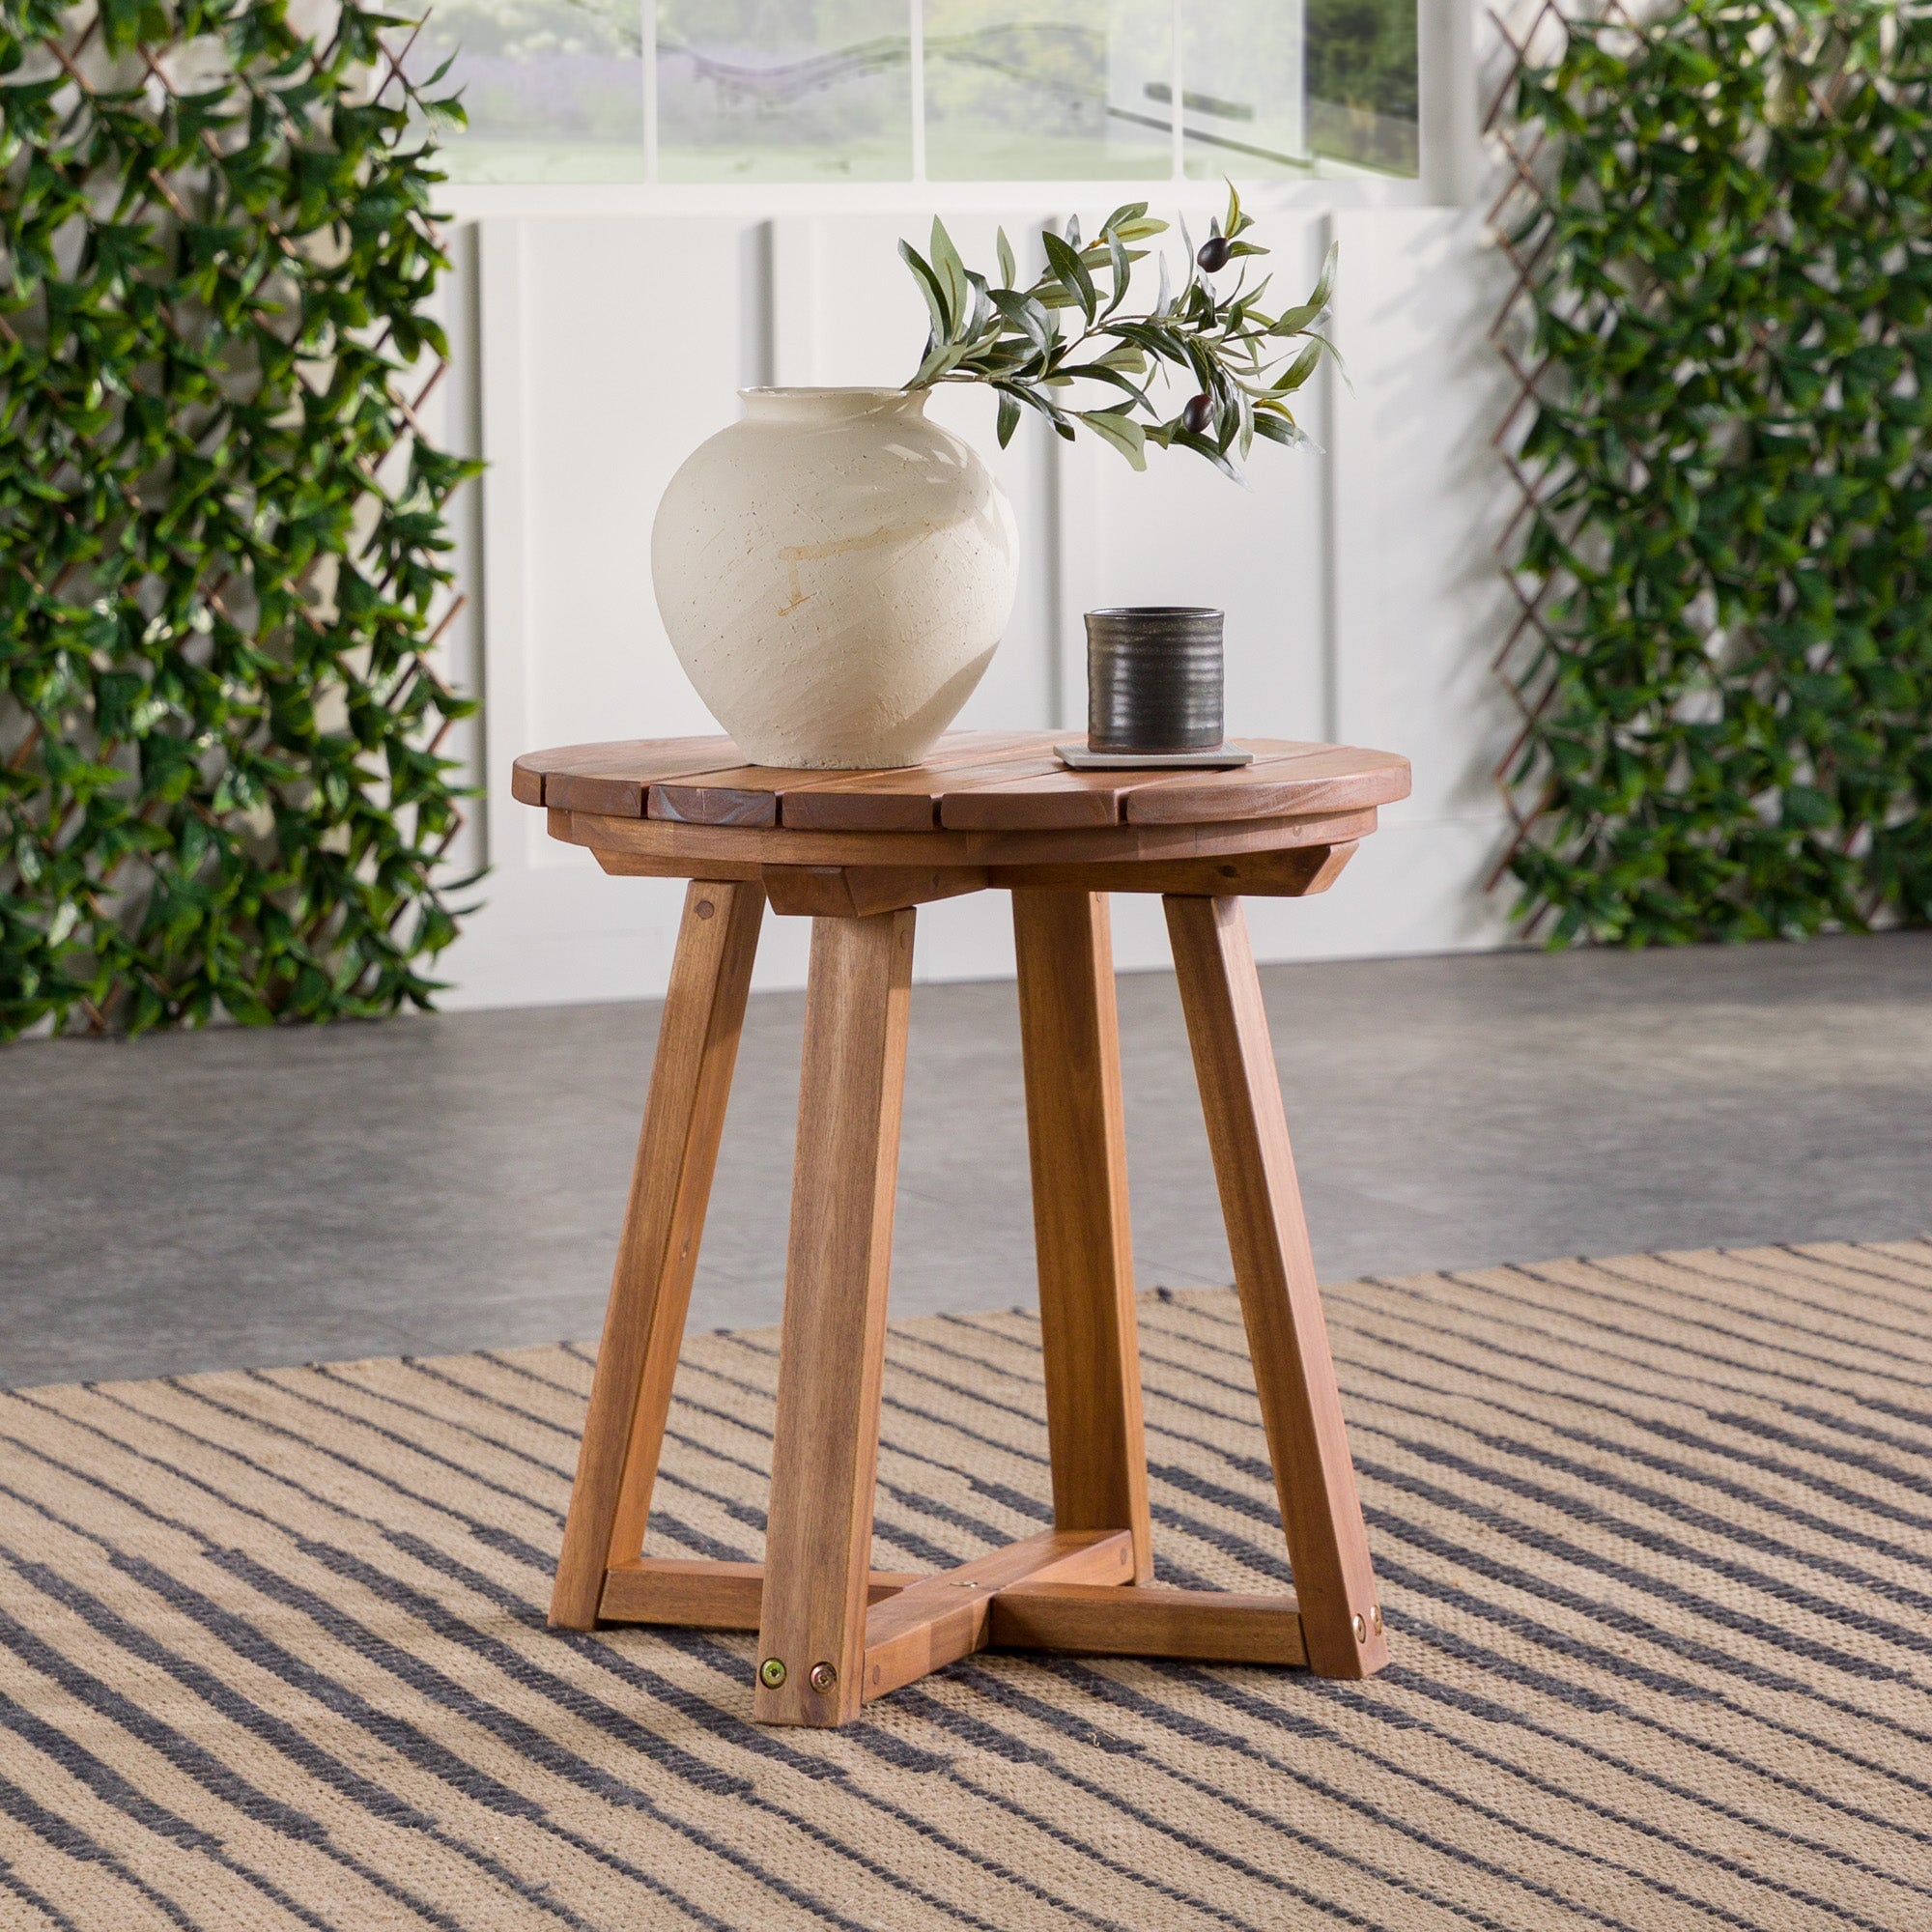 Outdoor Accent Tables  Coffee Tables, End Tables, Stools